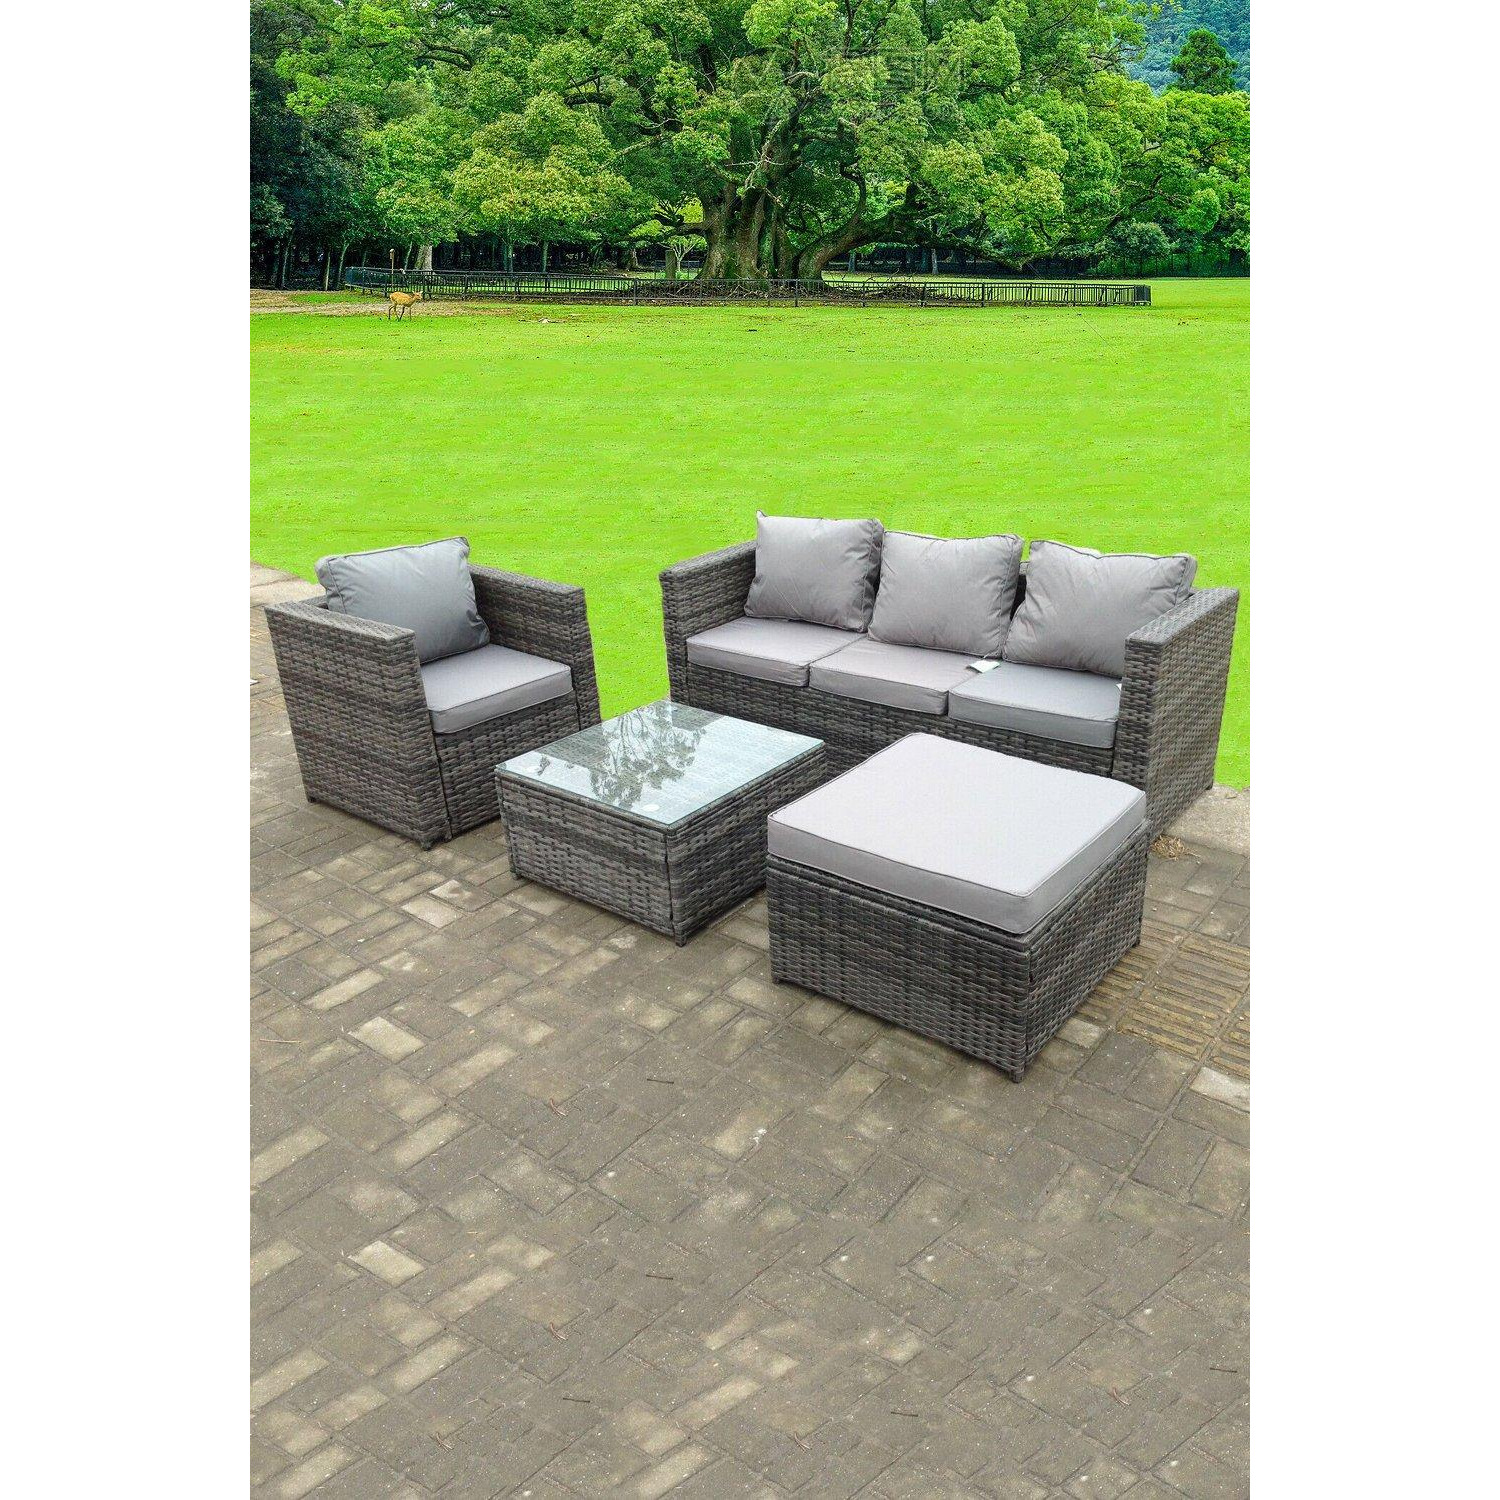 Lounge Rattan Sofa Set With Tables Stool Outdoor Furniture 5 Seater - image 1